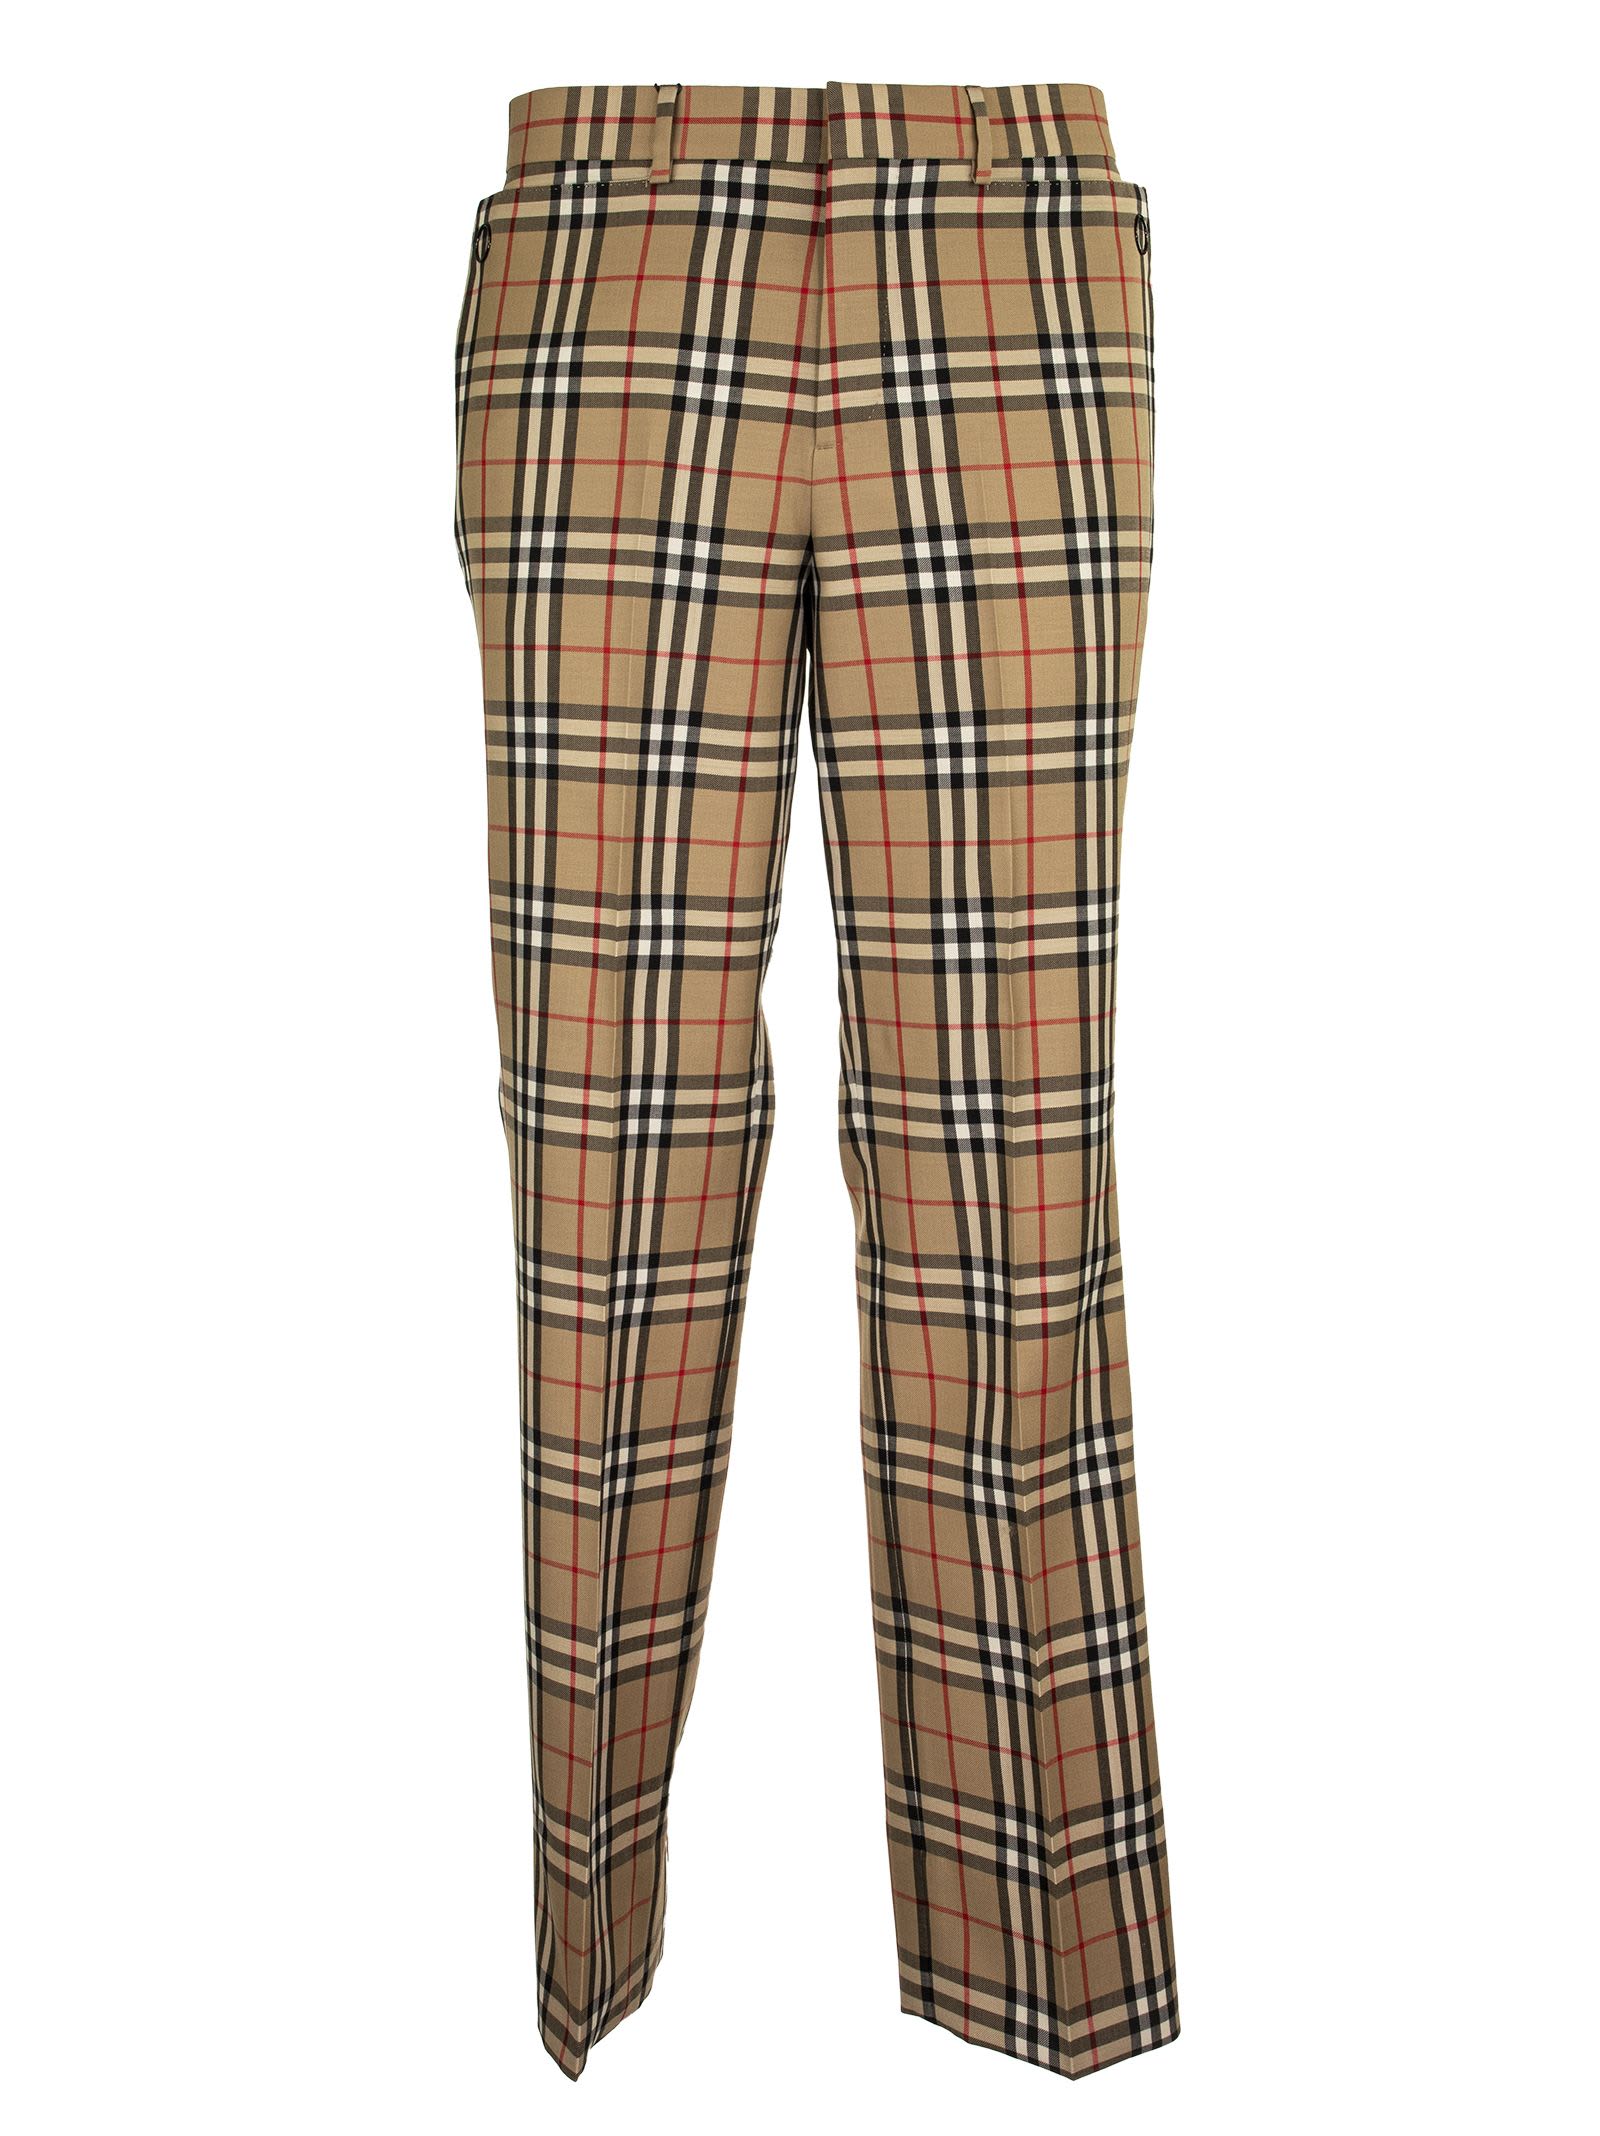 BURBERRY VINTAGE CHECK TAILORED TROUSERS FLAP TRS ARC. BEIGE,11255123